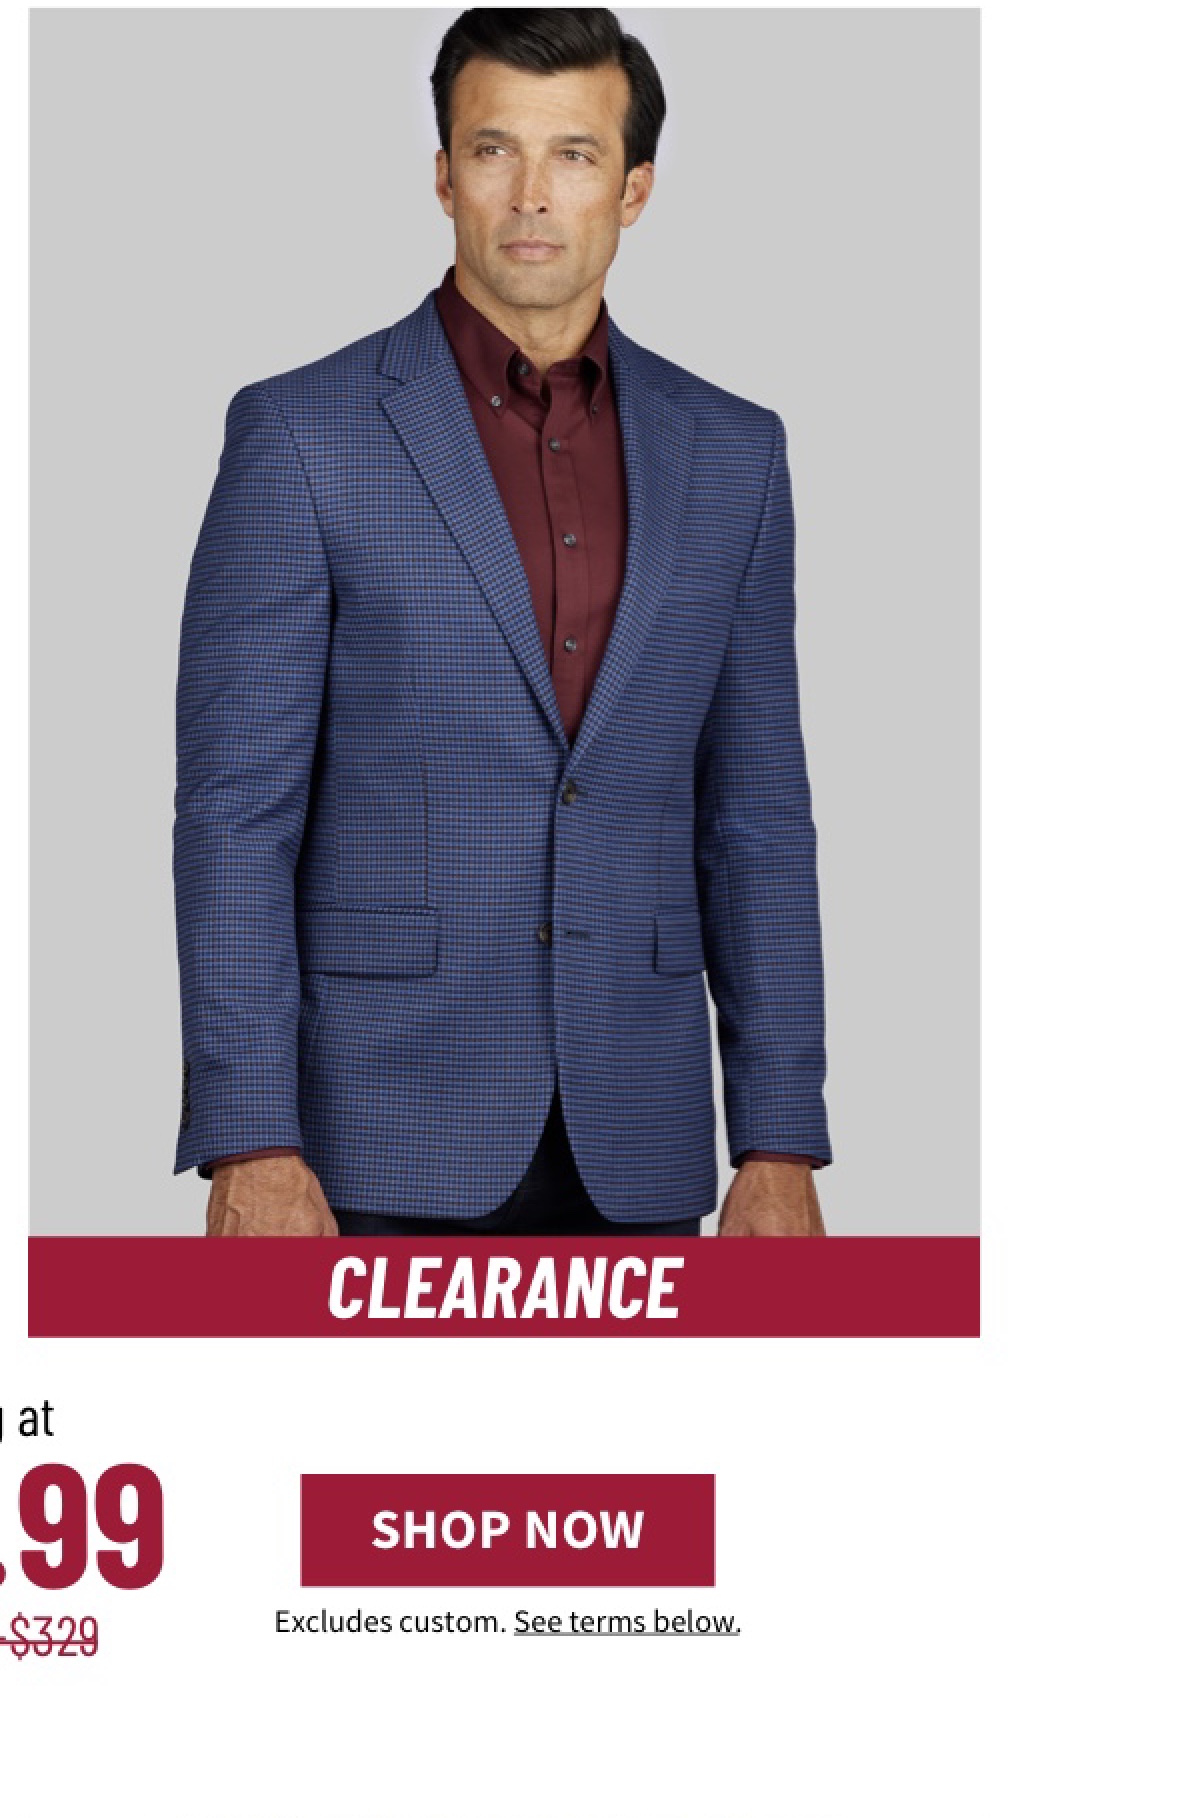 Clearance Sportcoats Starting at $49.99 Orig. $199-$329 Excludes custom. See terms below.